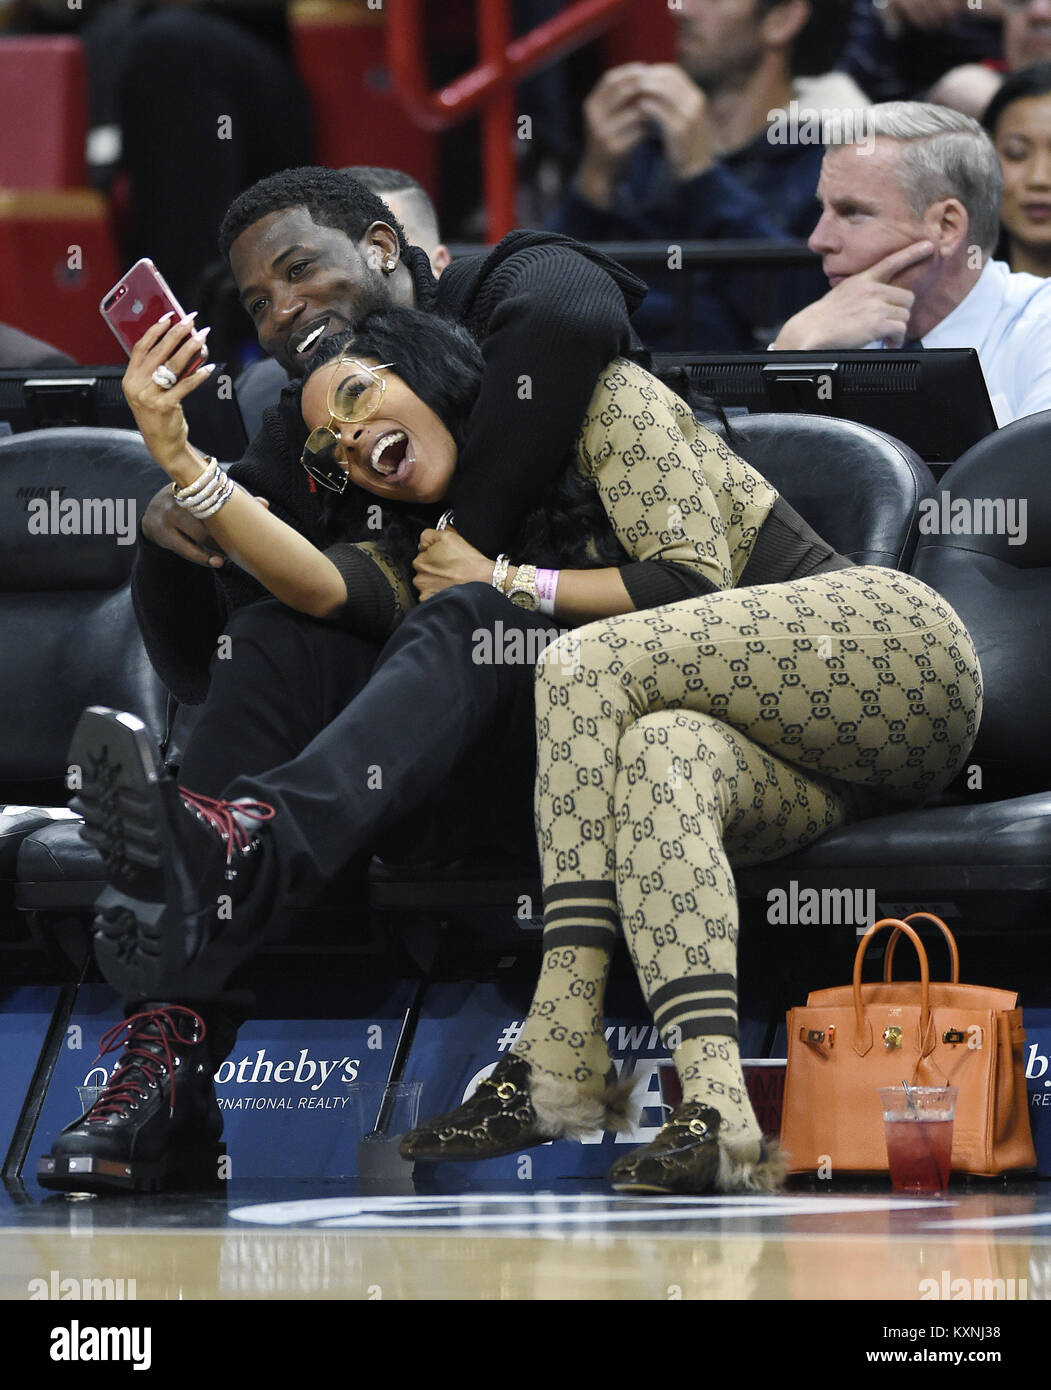 MIAMI, FL - JANUARY 5: Gucci Mane (L) and his wife Keyshia Ka'Oir (R) watch  the Miami Heat against the New York Knicks game at the America Airlines  Arena on January 5,